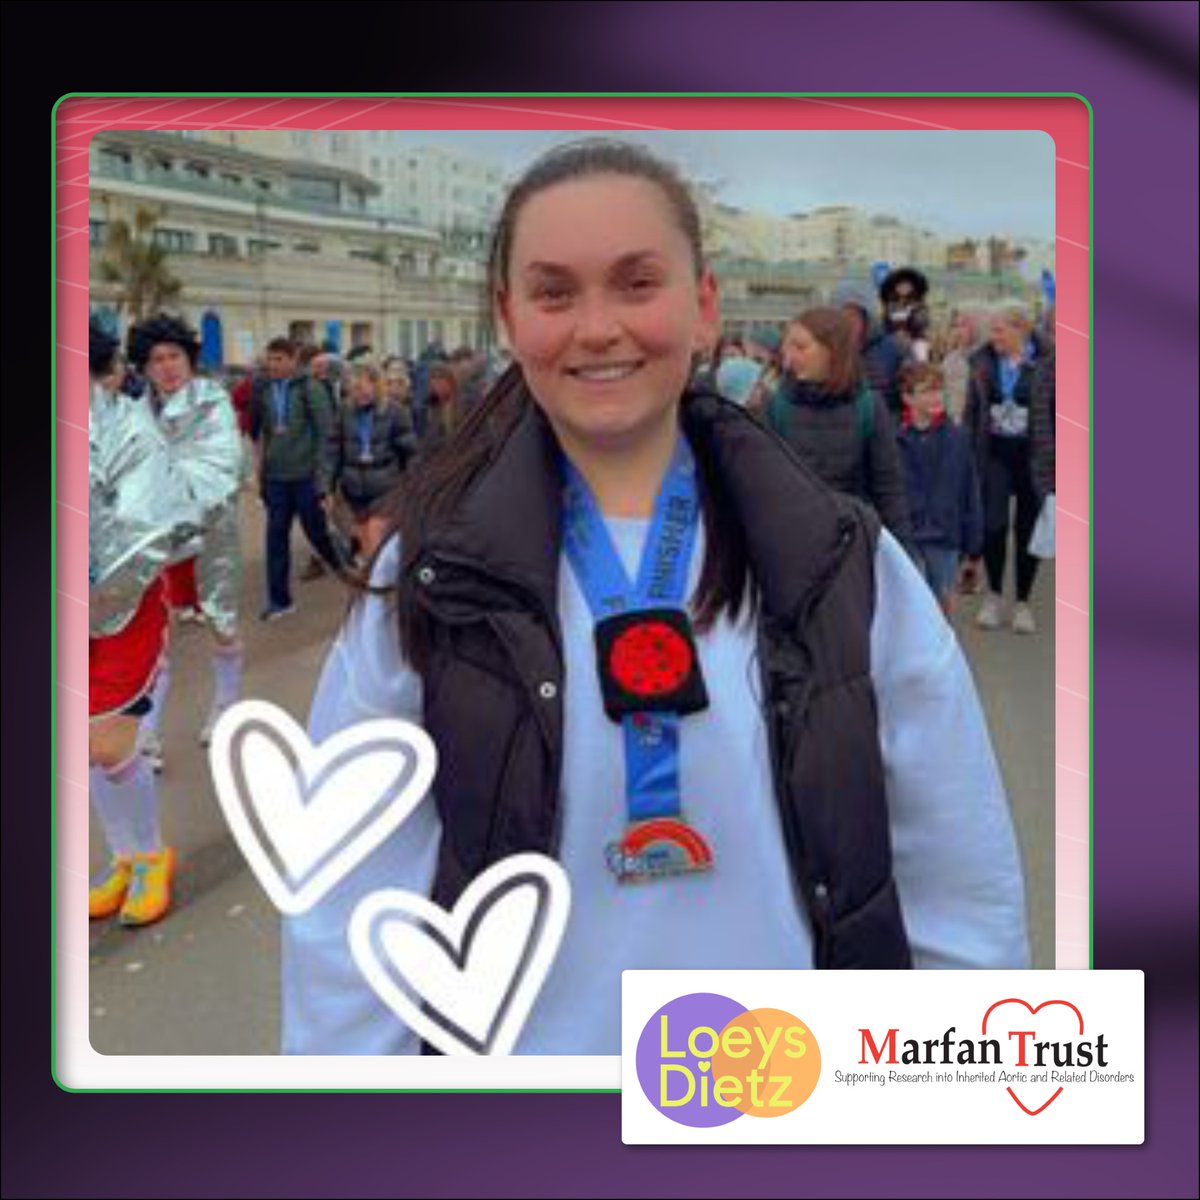 Making a big difference to our small charity, Marfan Trust fundraisers are unstoppable in their support. Today we celebrate Brooke who ran the Brighton Half Marathon in memory of her uncle Jason. #Marfan is a family affair for Brooke. Read her story: bit.ly/3J9d6a7